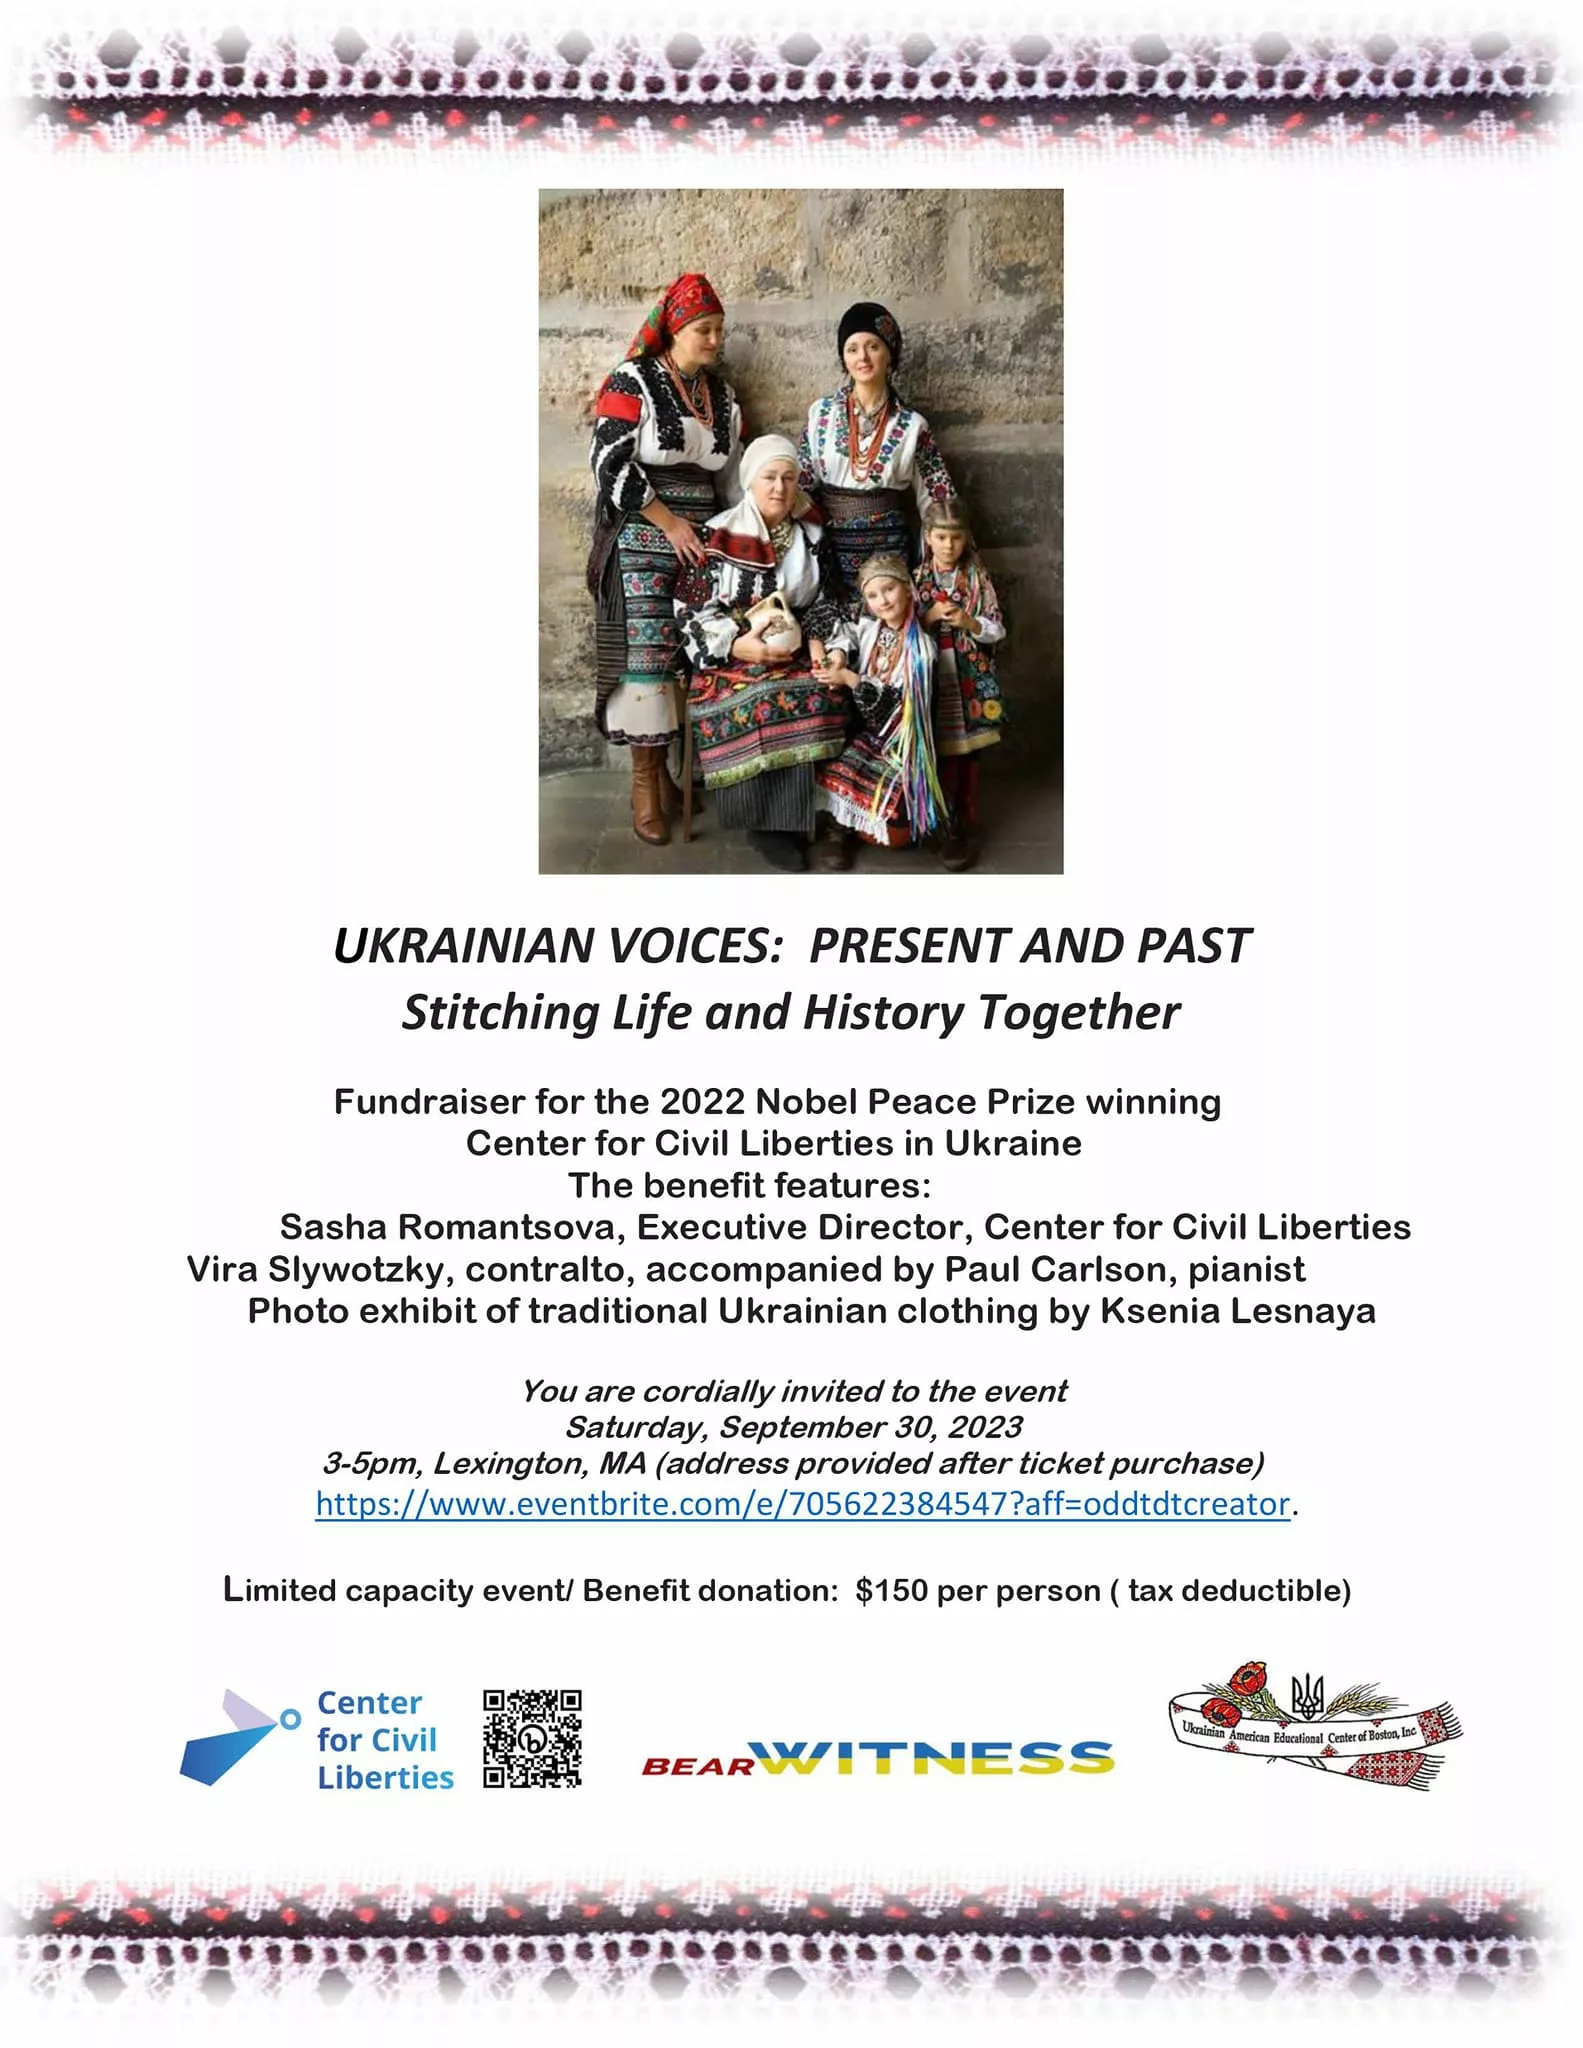 Ukrainian Voices:  Present and Past (Stitching Life and History Together)